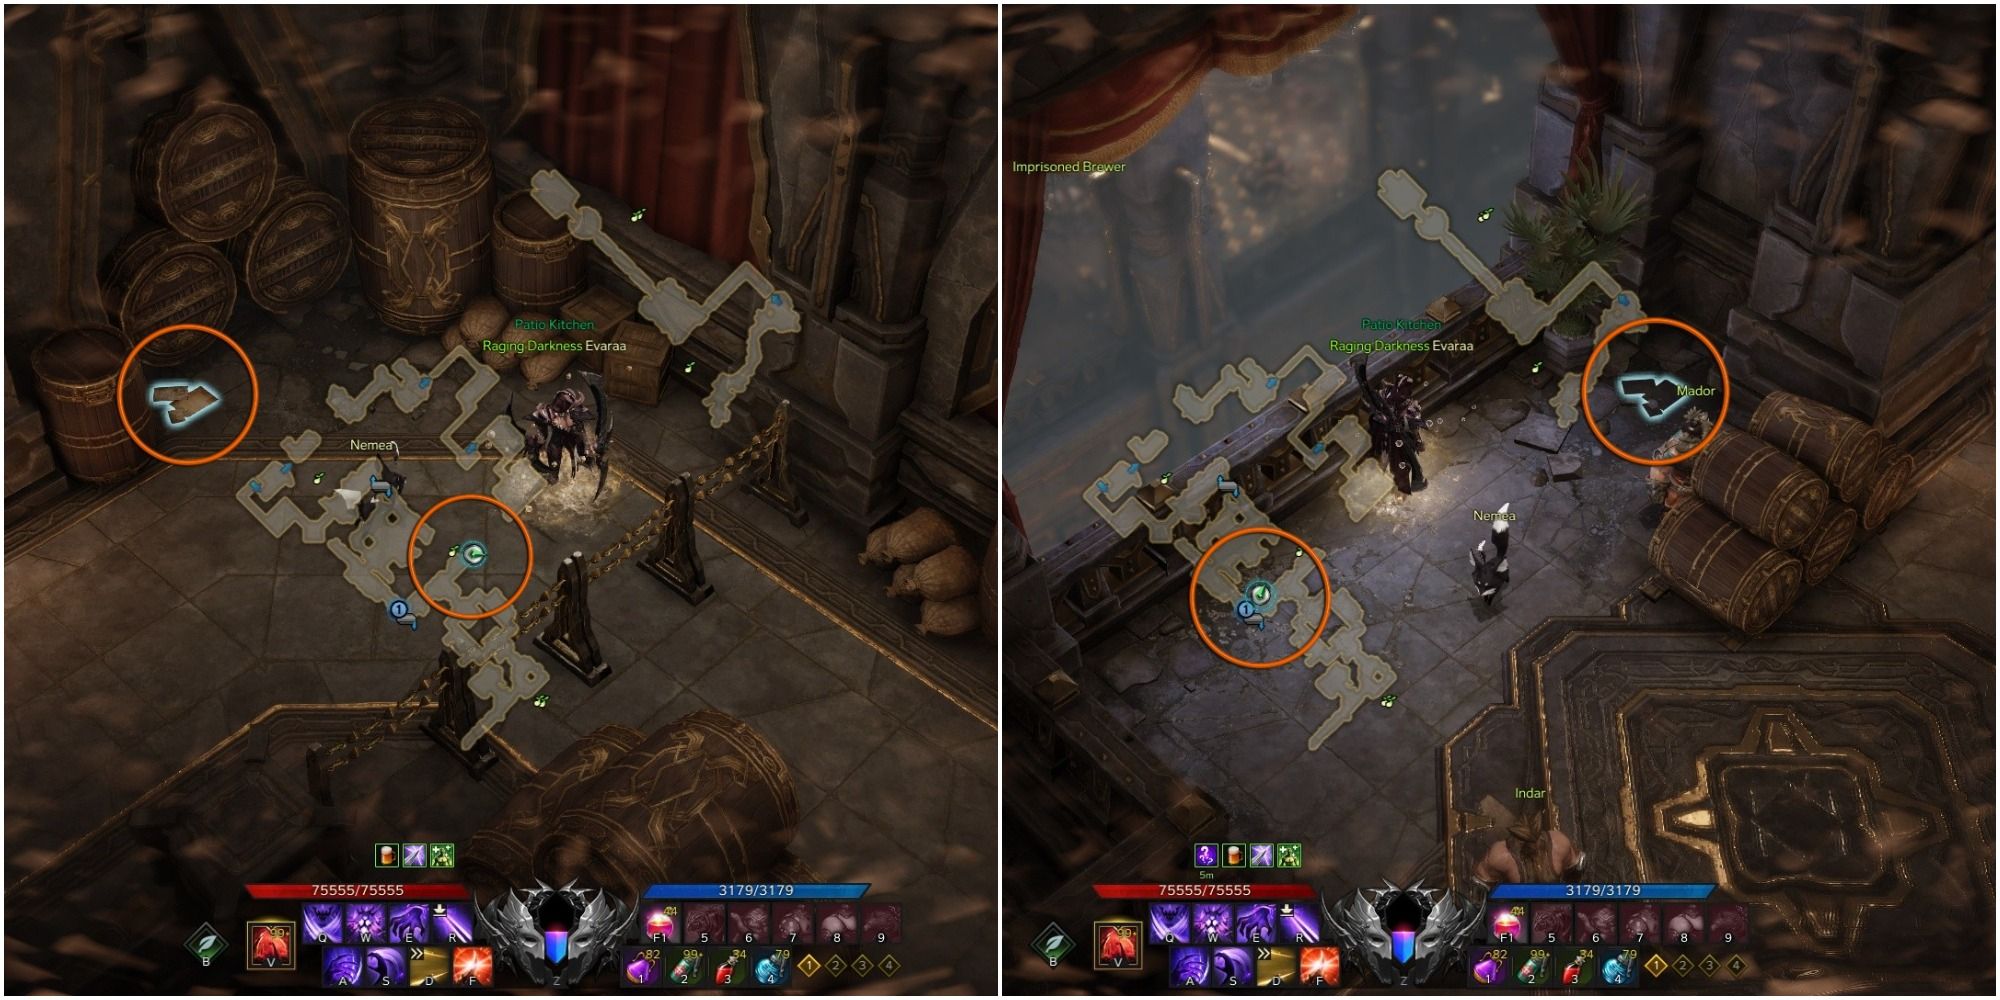 Lost Ark split image of Yorn's Hidden Story 6-1 and 6-2 locations with mini-maps open, orange circles around objects and player icons